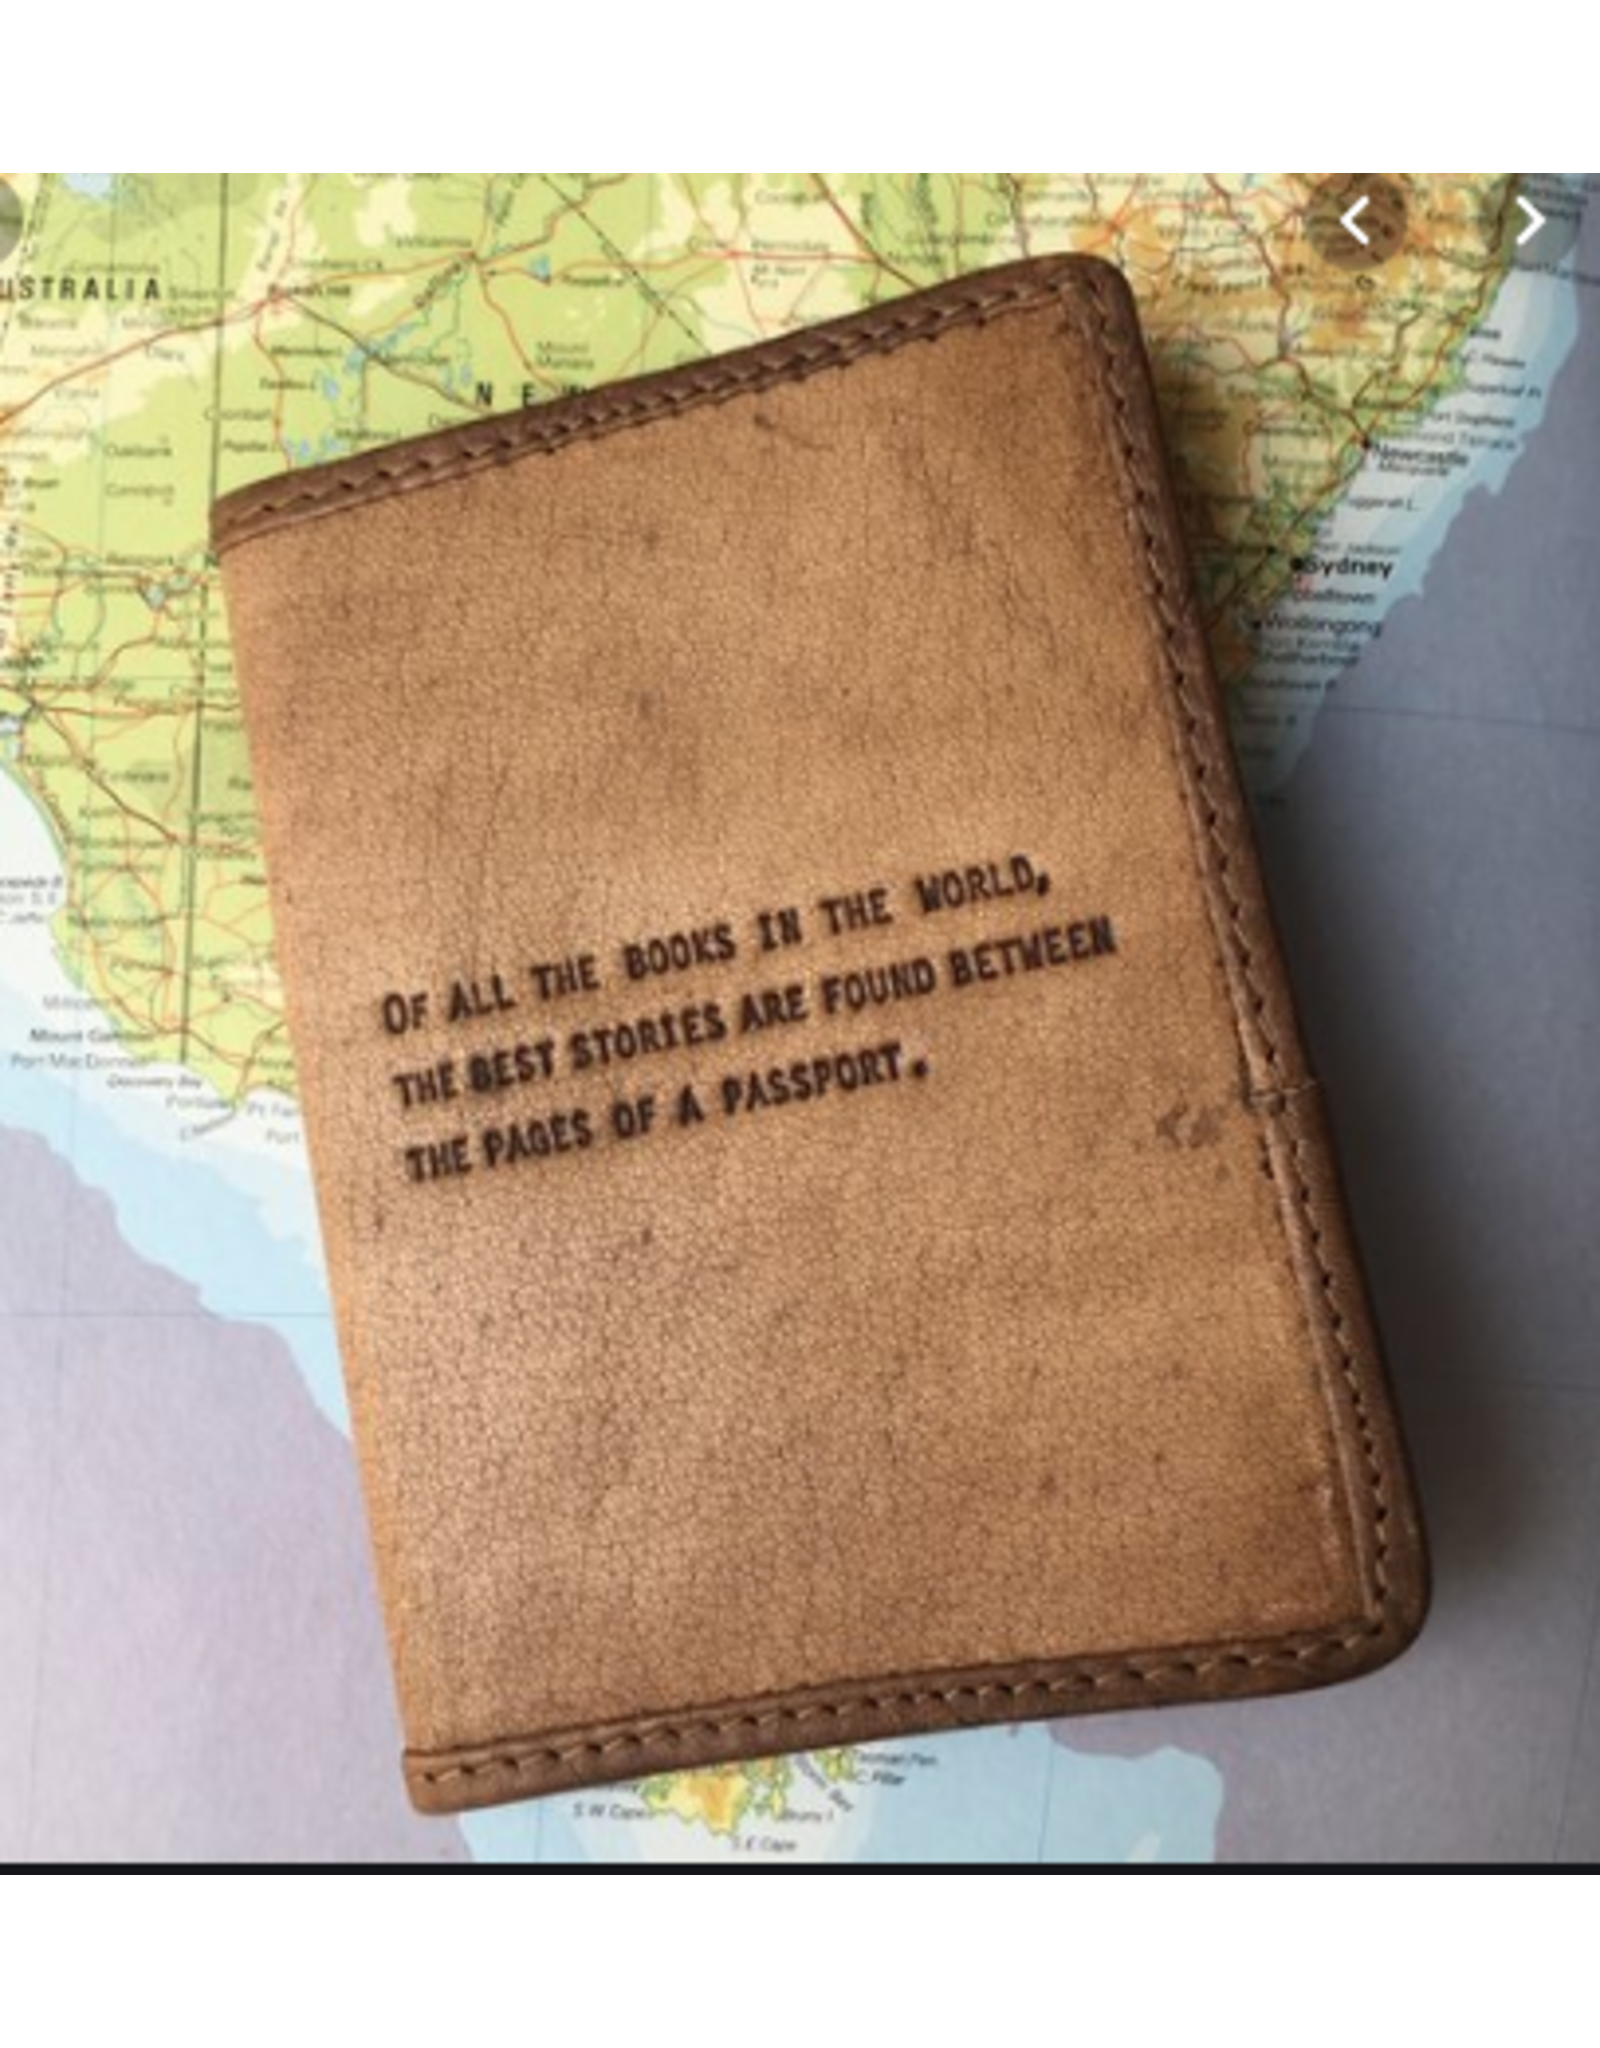 Sugarboo & Co Leather Passport Cover, Of All the Books in the World